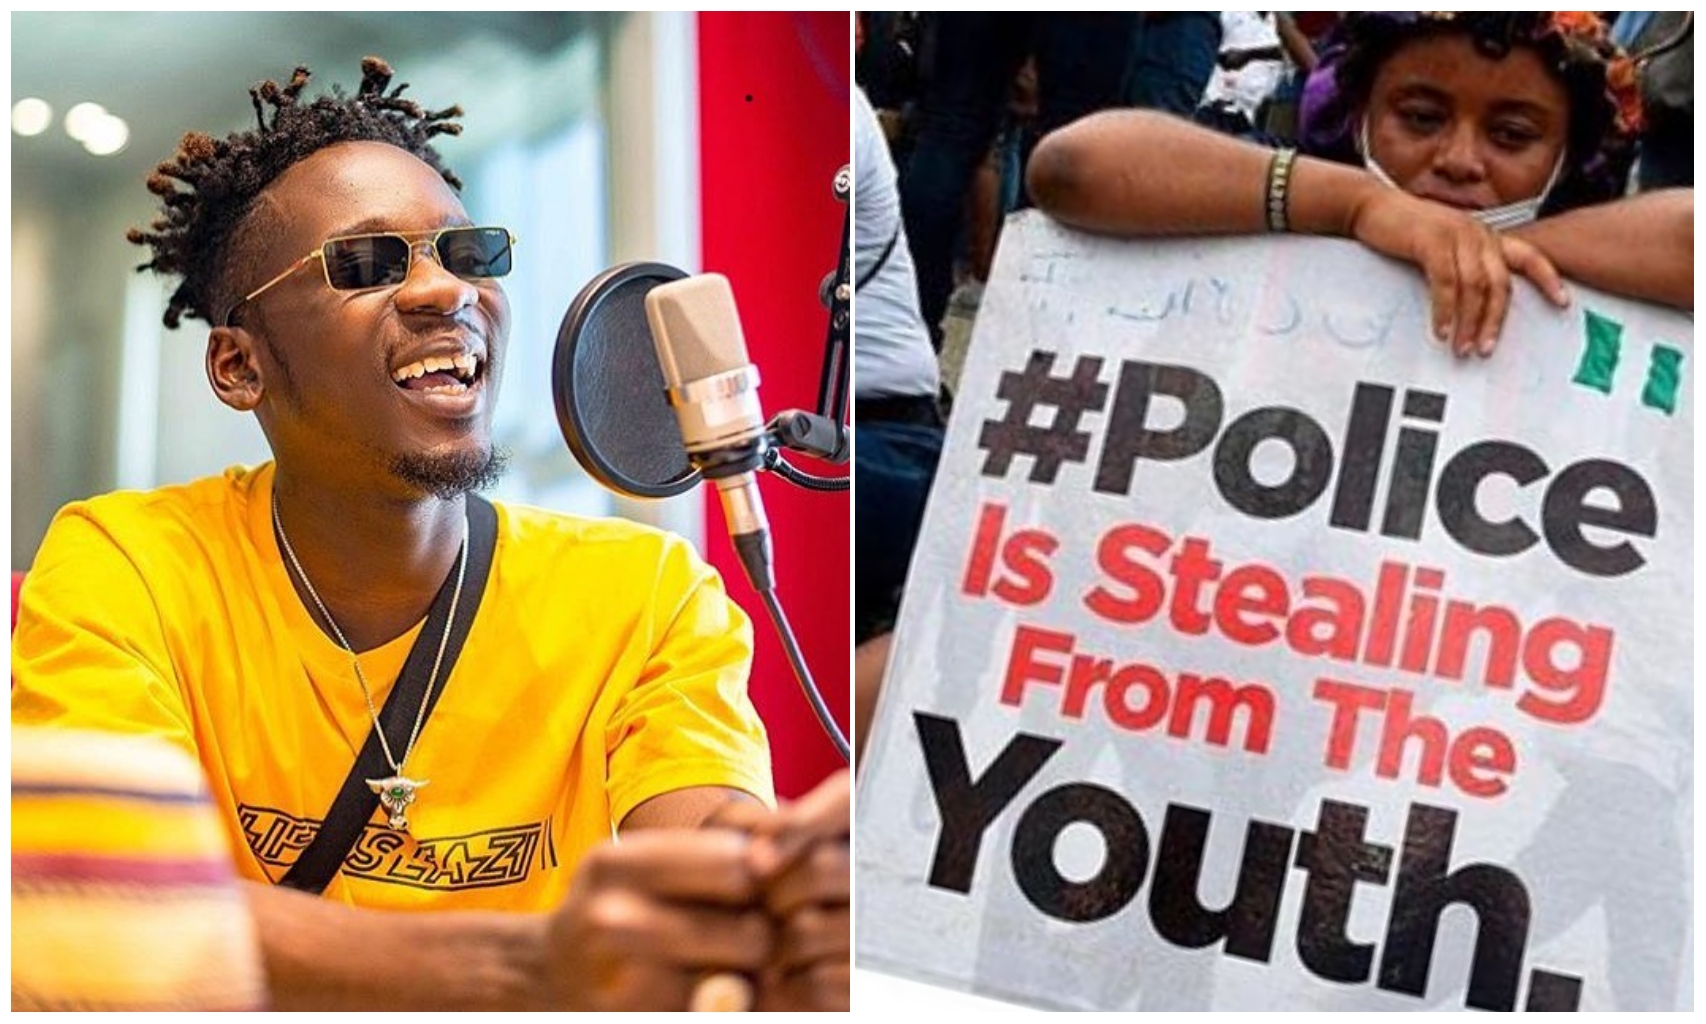 EndSars: This is the vision 2020 we heard about, the veil has been removed – Mr Eazi